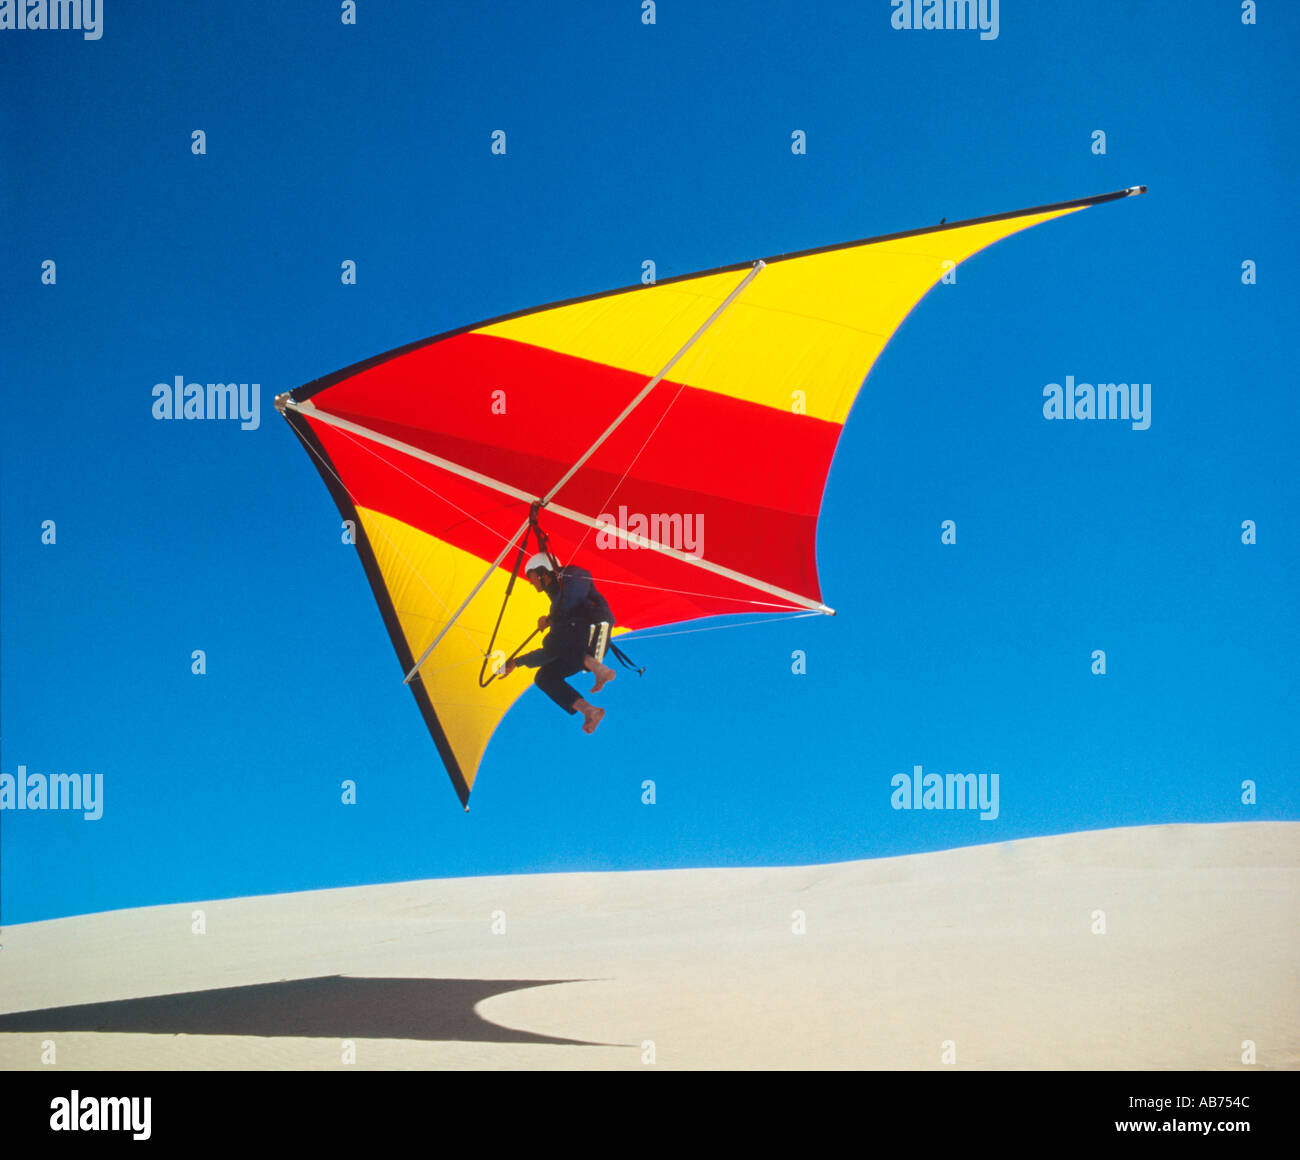 man taking off from sand dunes on a hang glider Stock Photo